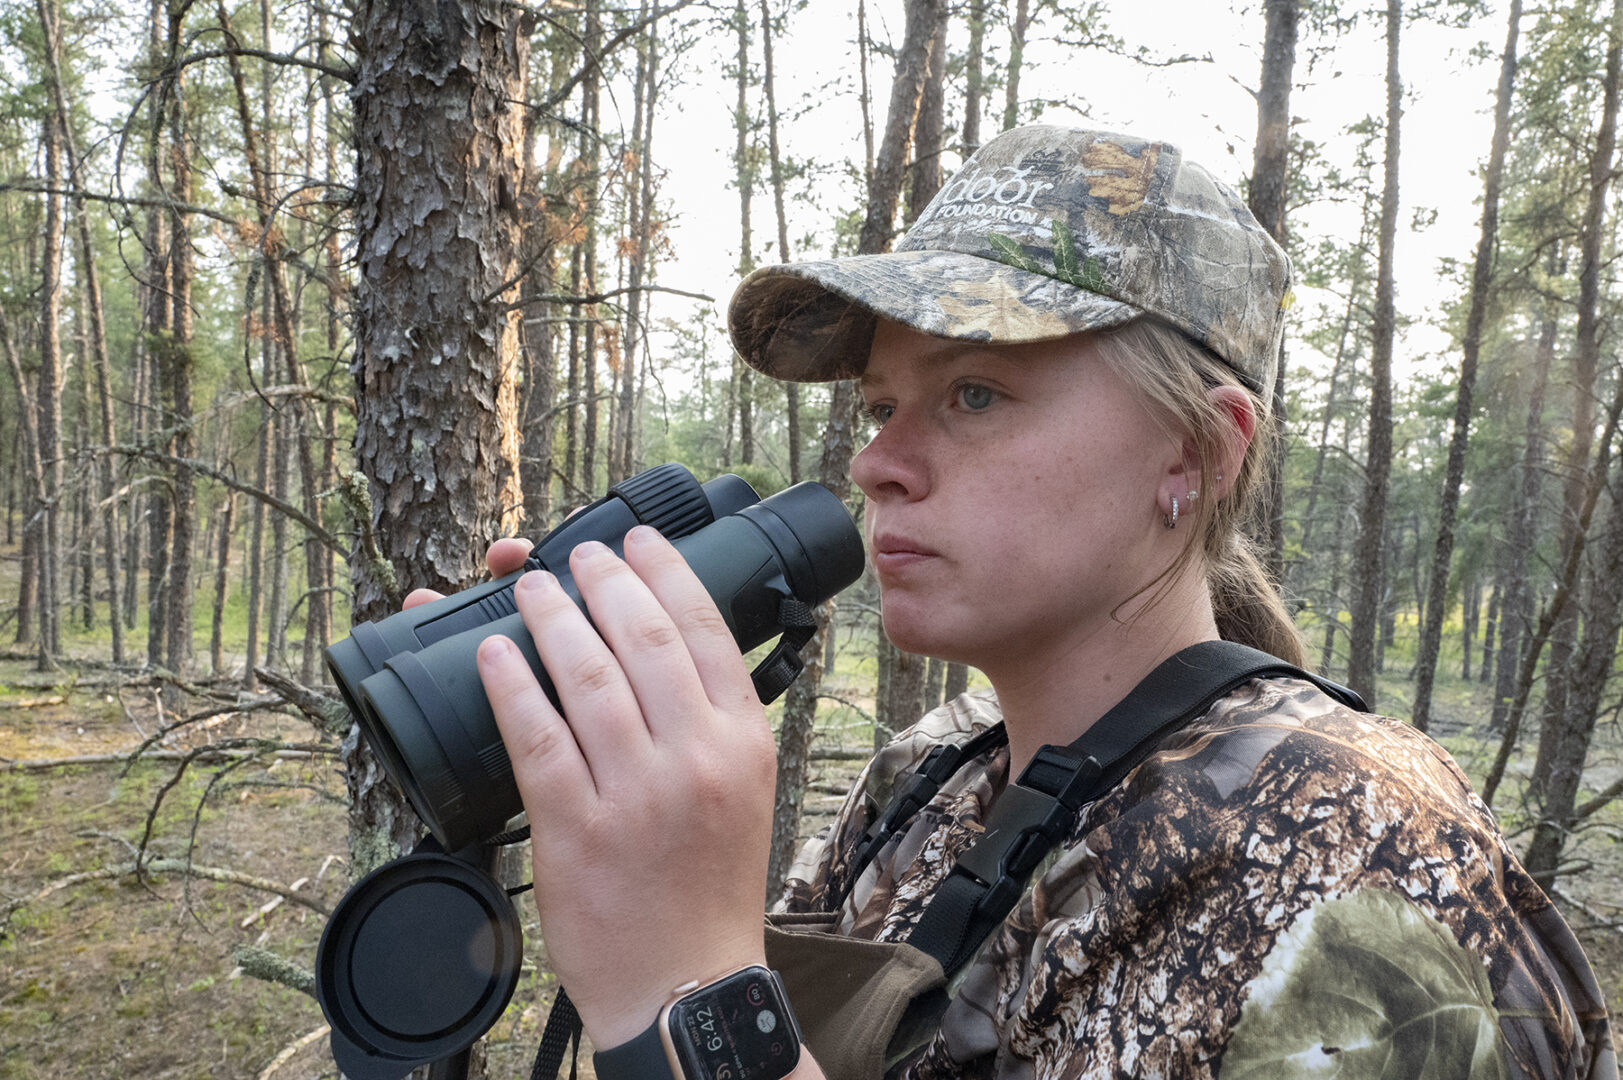 A woman in camouflage holding binoculars while standing next to trees.